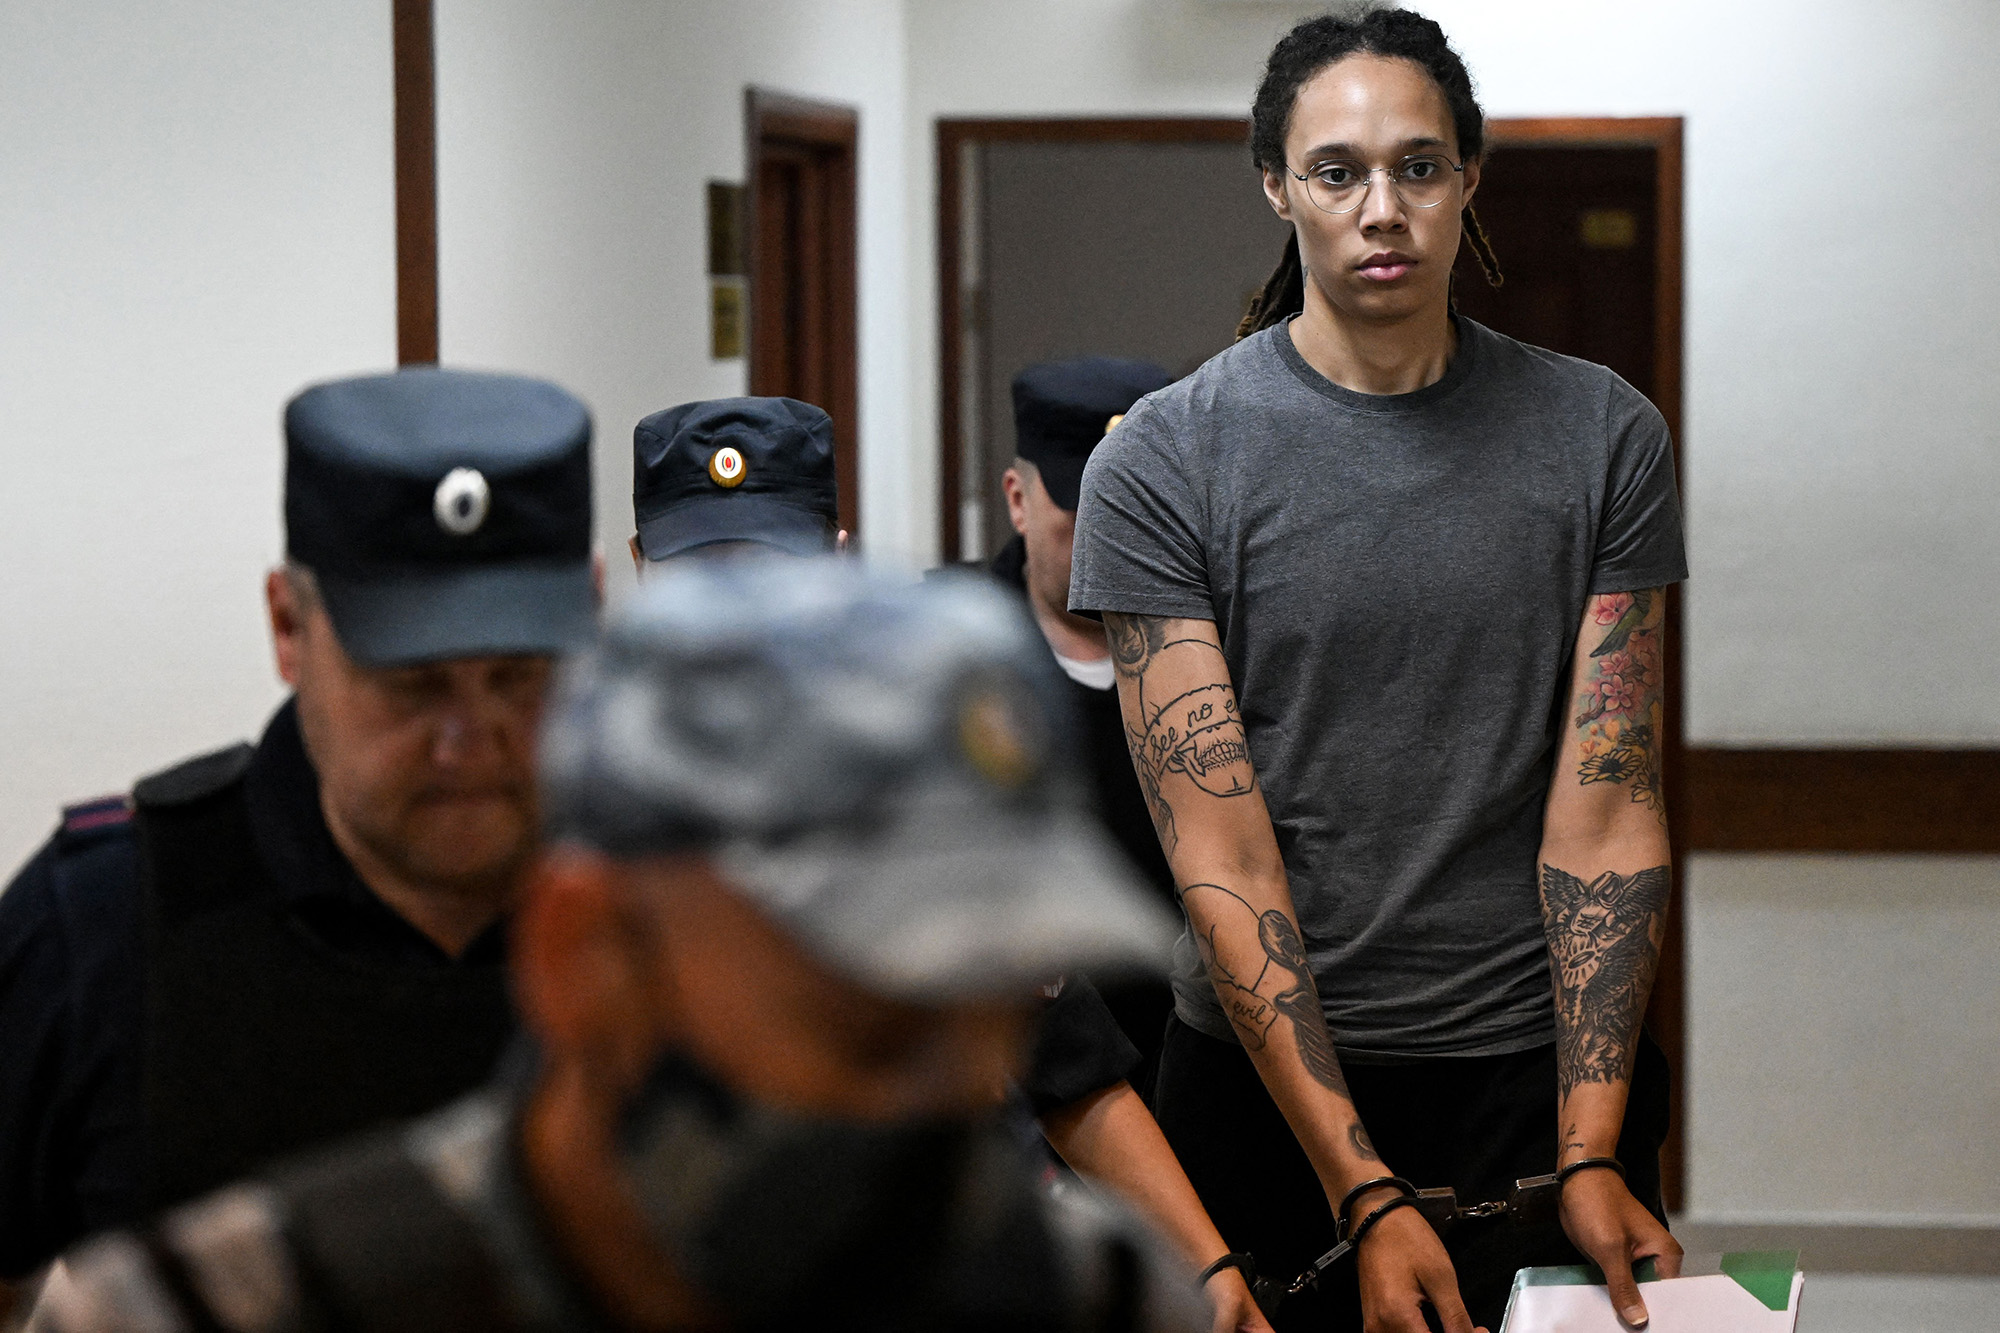 Brittney Griner arrives to a hearing at the Khimki Court, outside Moscow, on August 4.